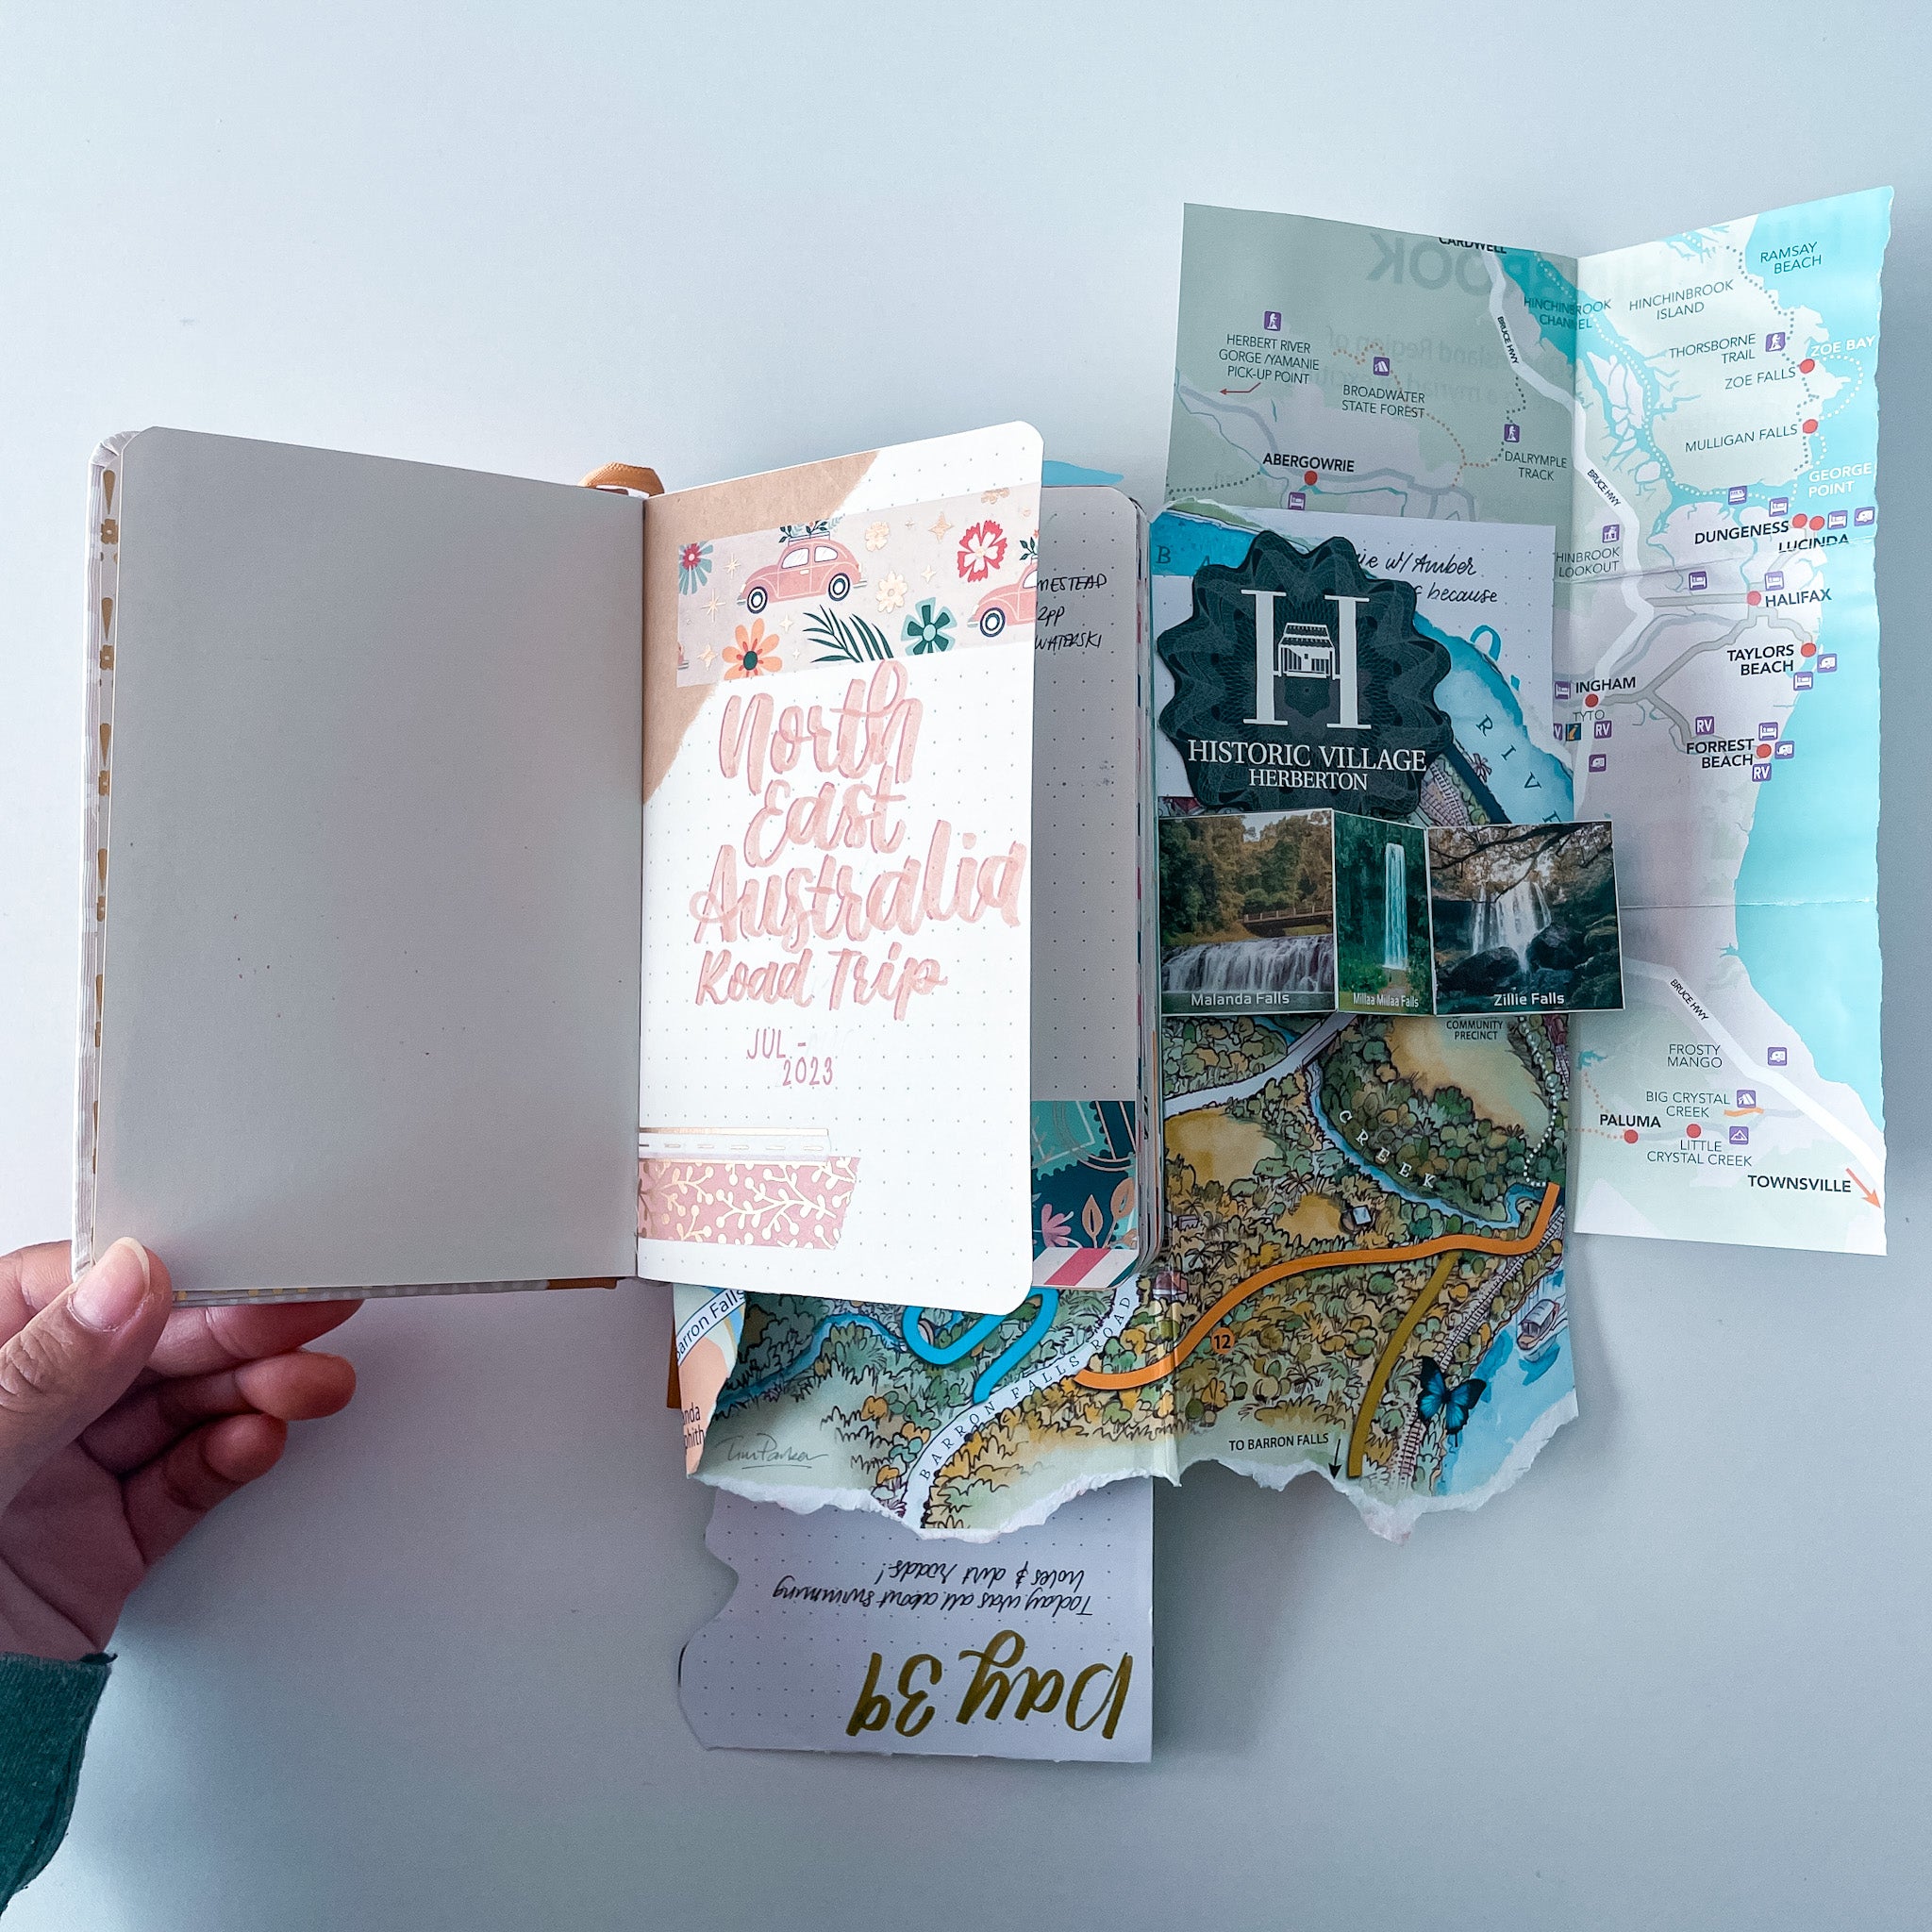 Collect Moments Not Things, Travel themed 2 page Scrapbooking